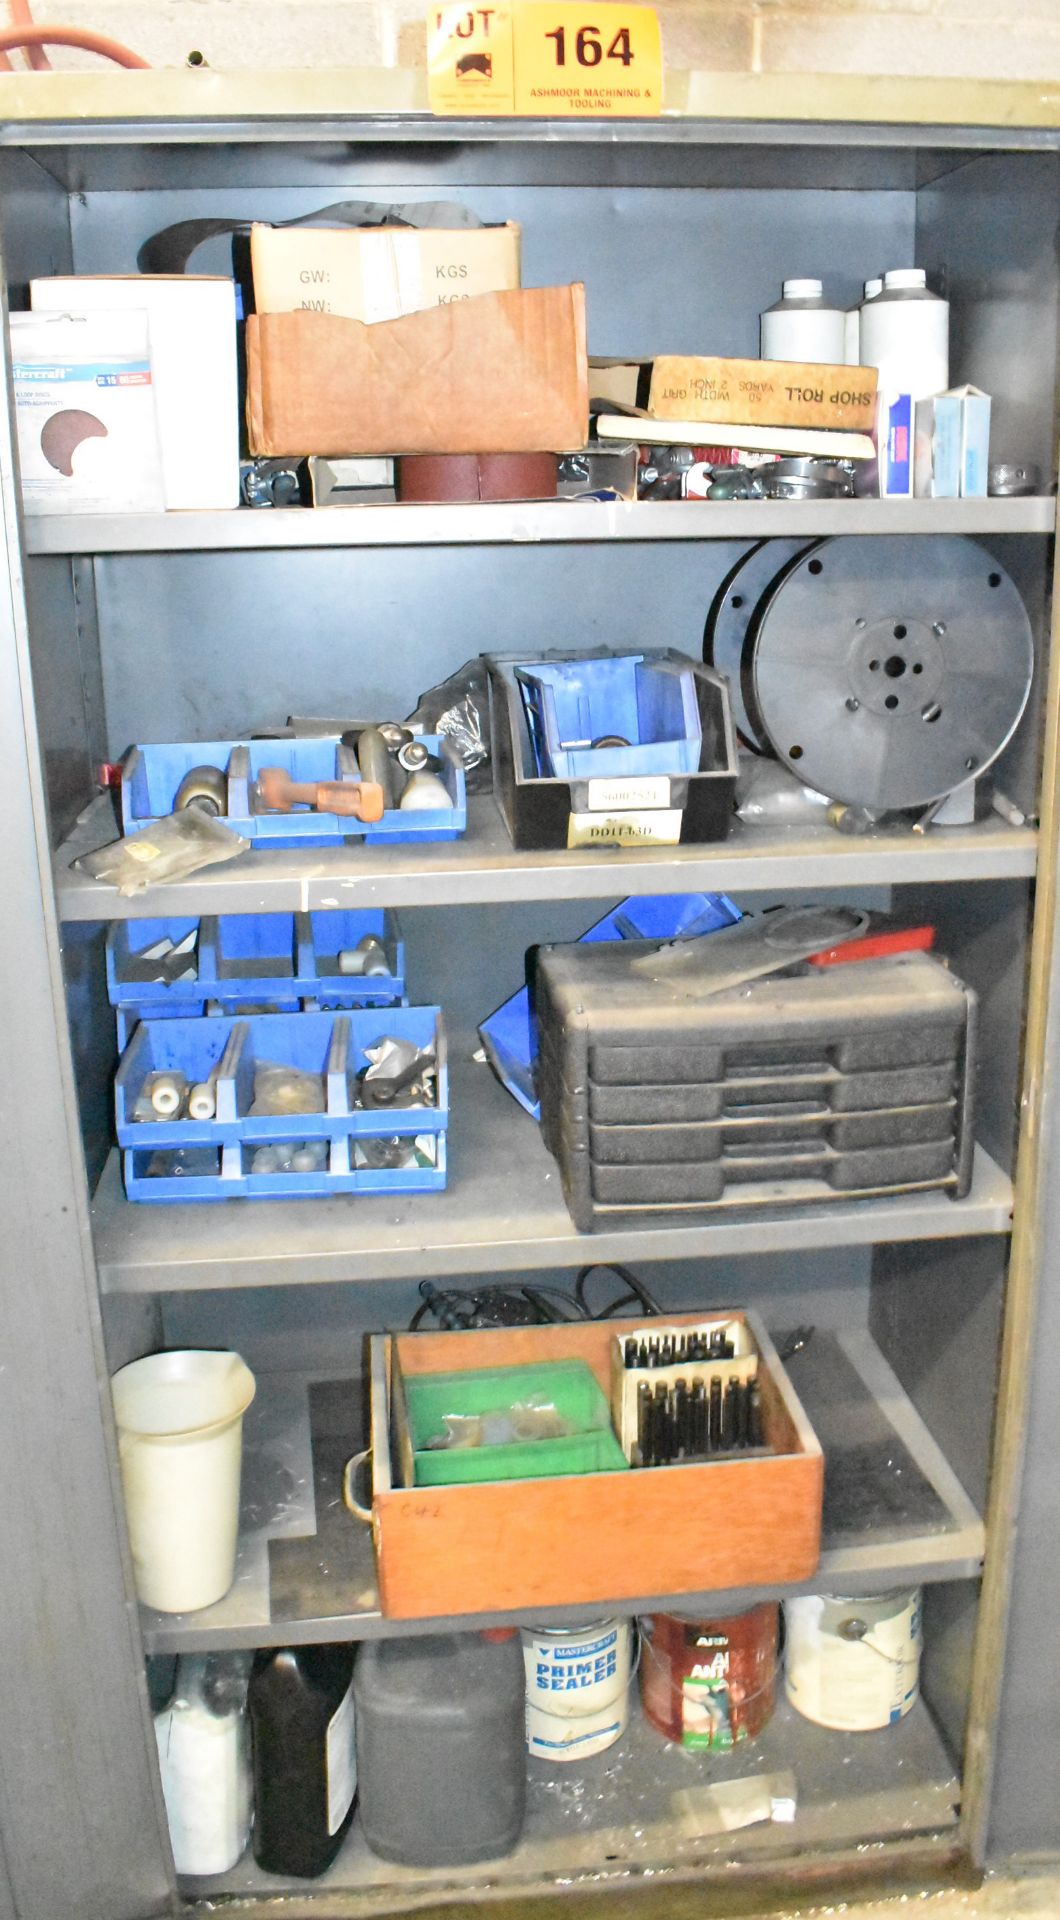 LOT/ STEEL HIGHBOY CABINET WITH CONTENTS - INCLUDING HAND TOOLS, SHOP SUPPLIES, SANDING PERISHABLES